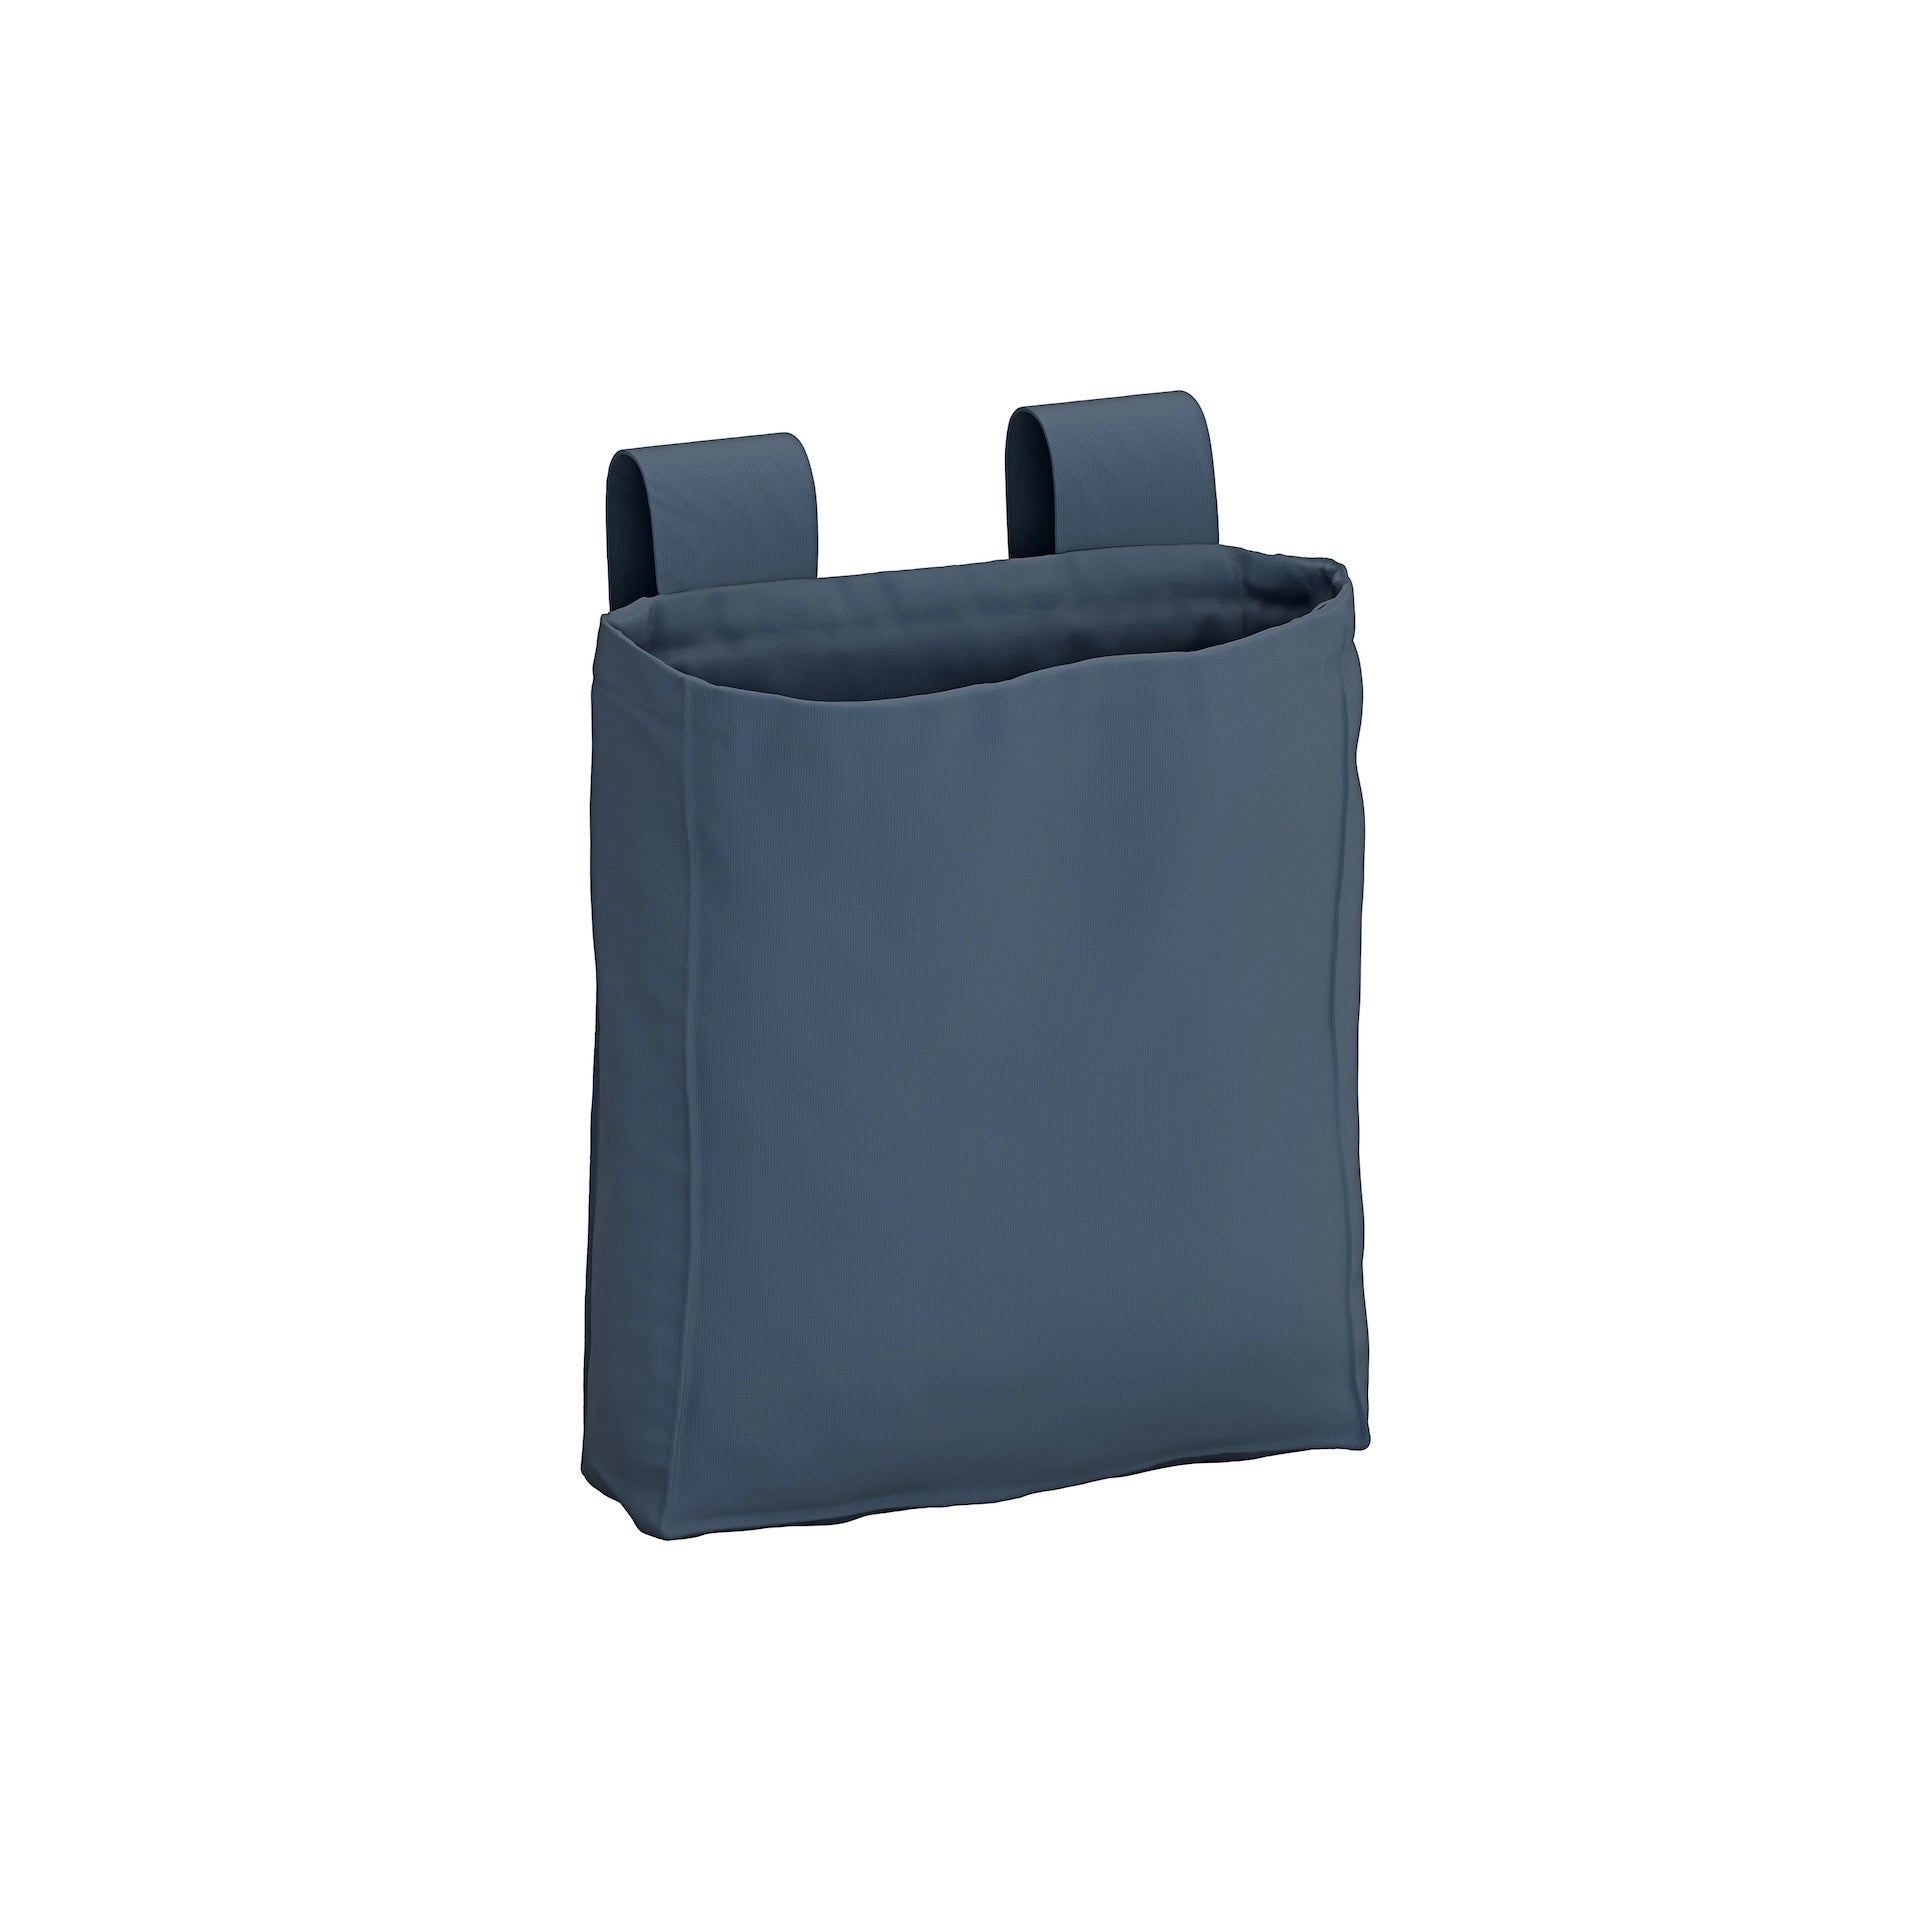 Furniture To Go Steens For Kids Pockets in Blue